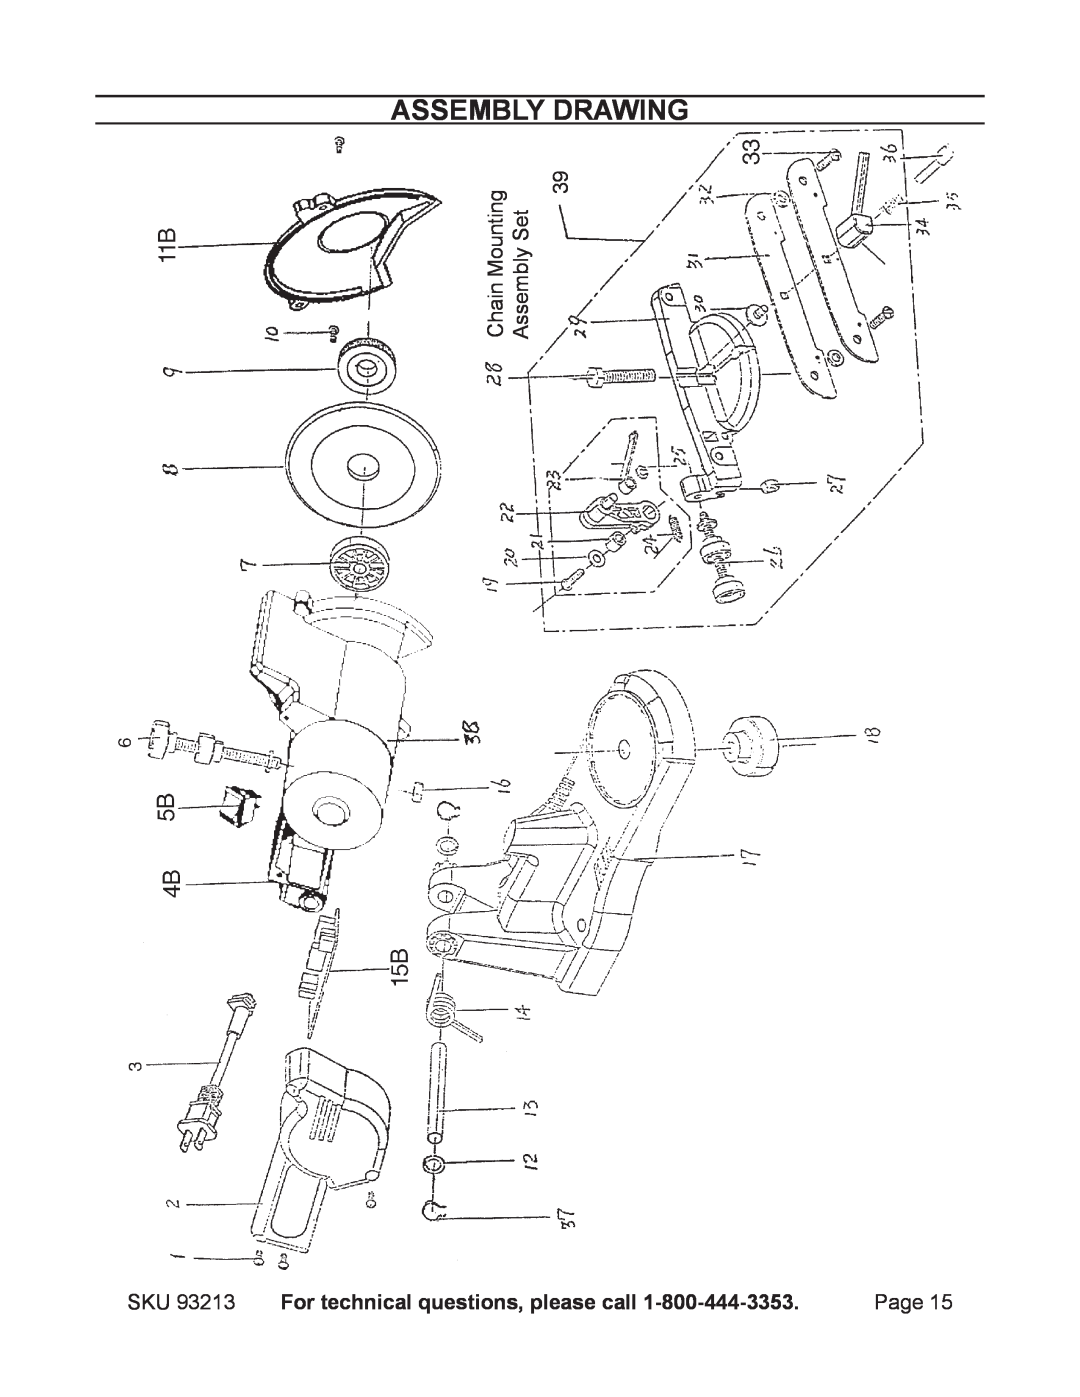 Chicago Electric 93213 manual Assembly Drawing, For technical questions, please call 